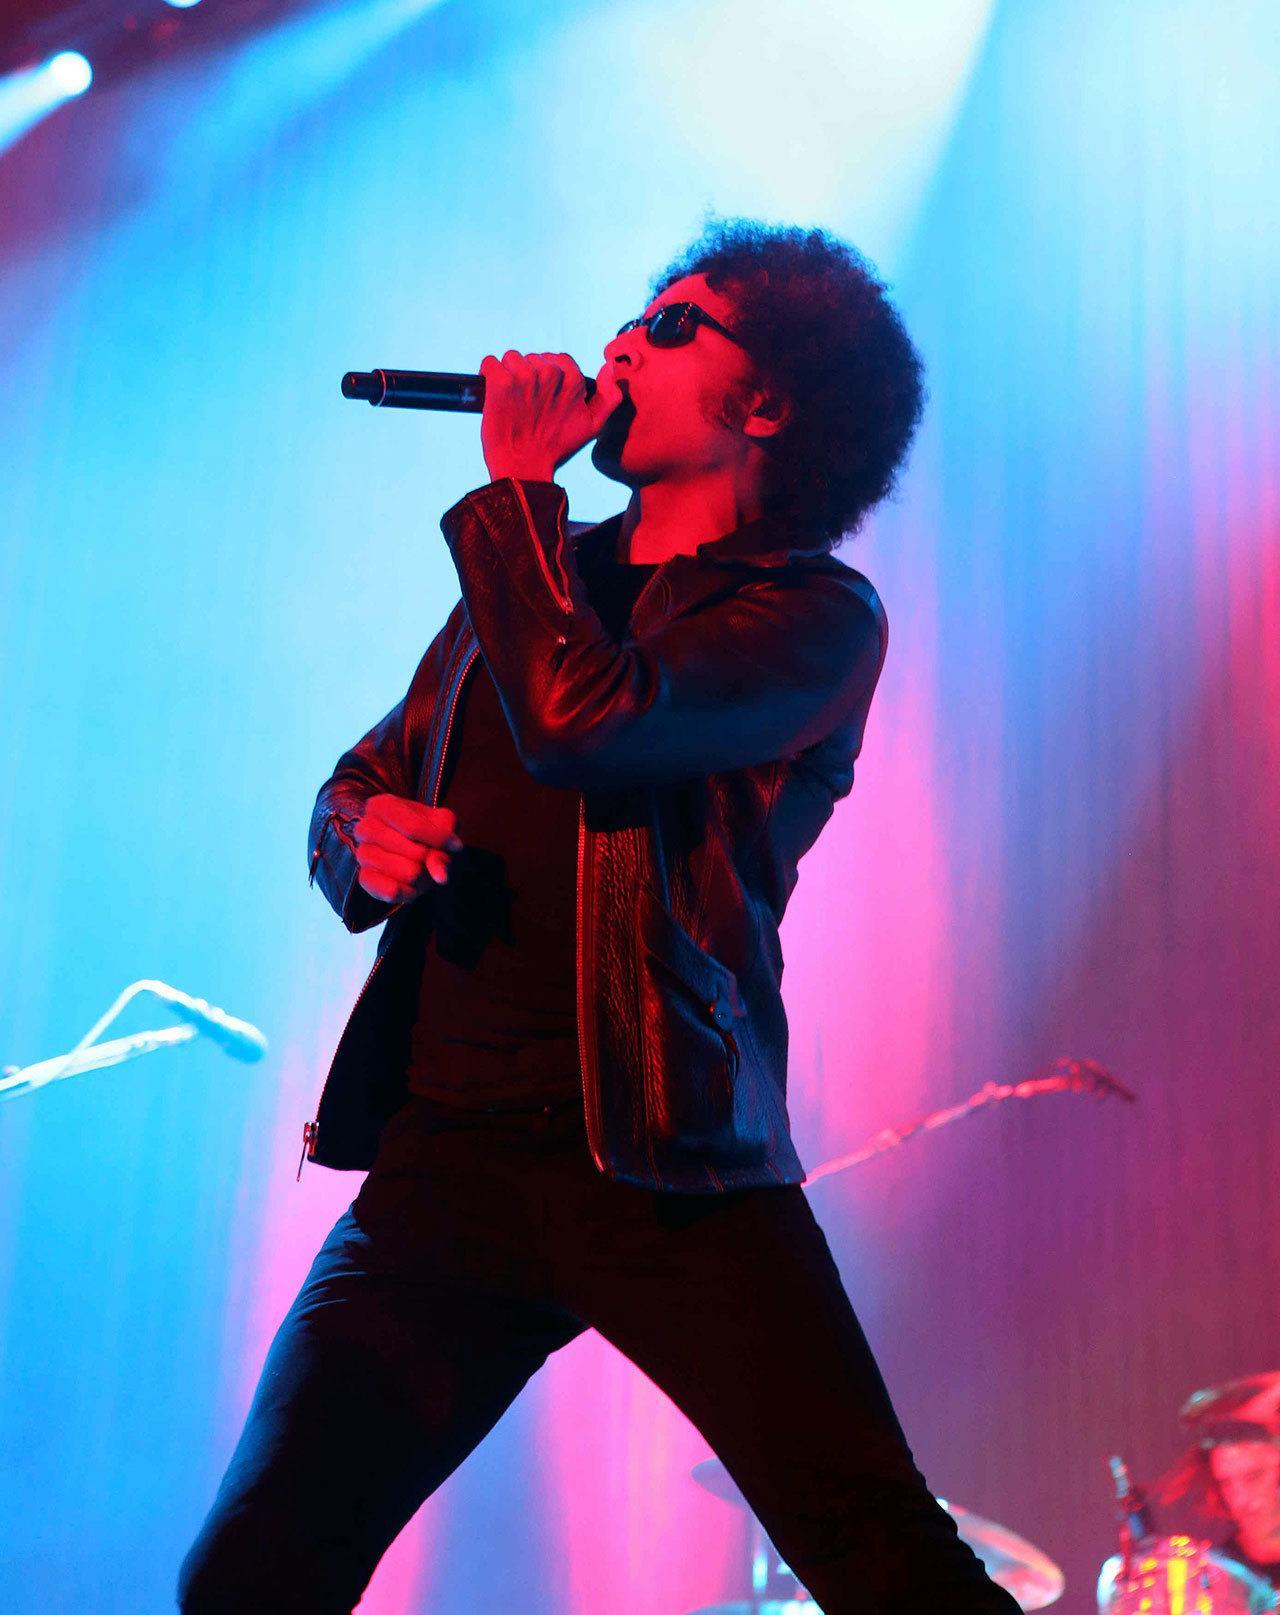 William DuVall and Alice in Chains will perform in Seattle on July 8. (Robb D. Cohen/Invision/AP)